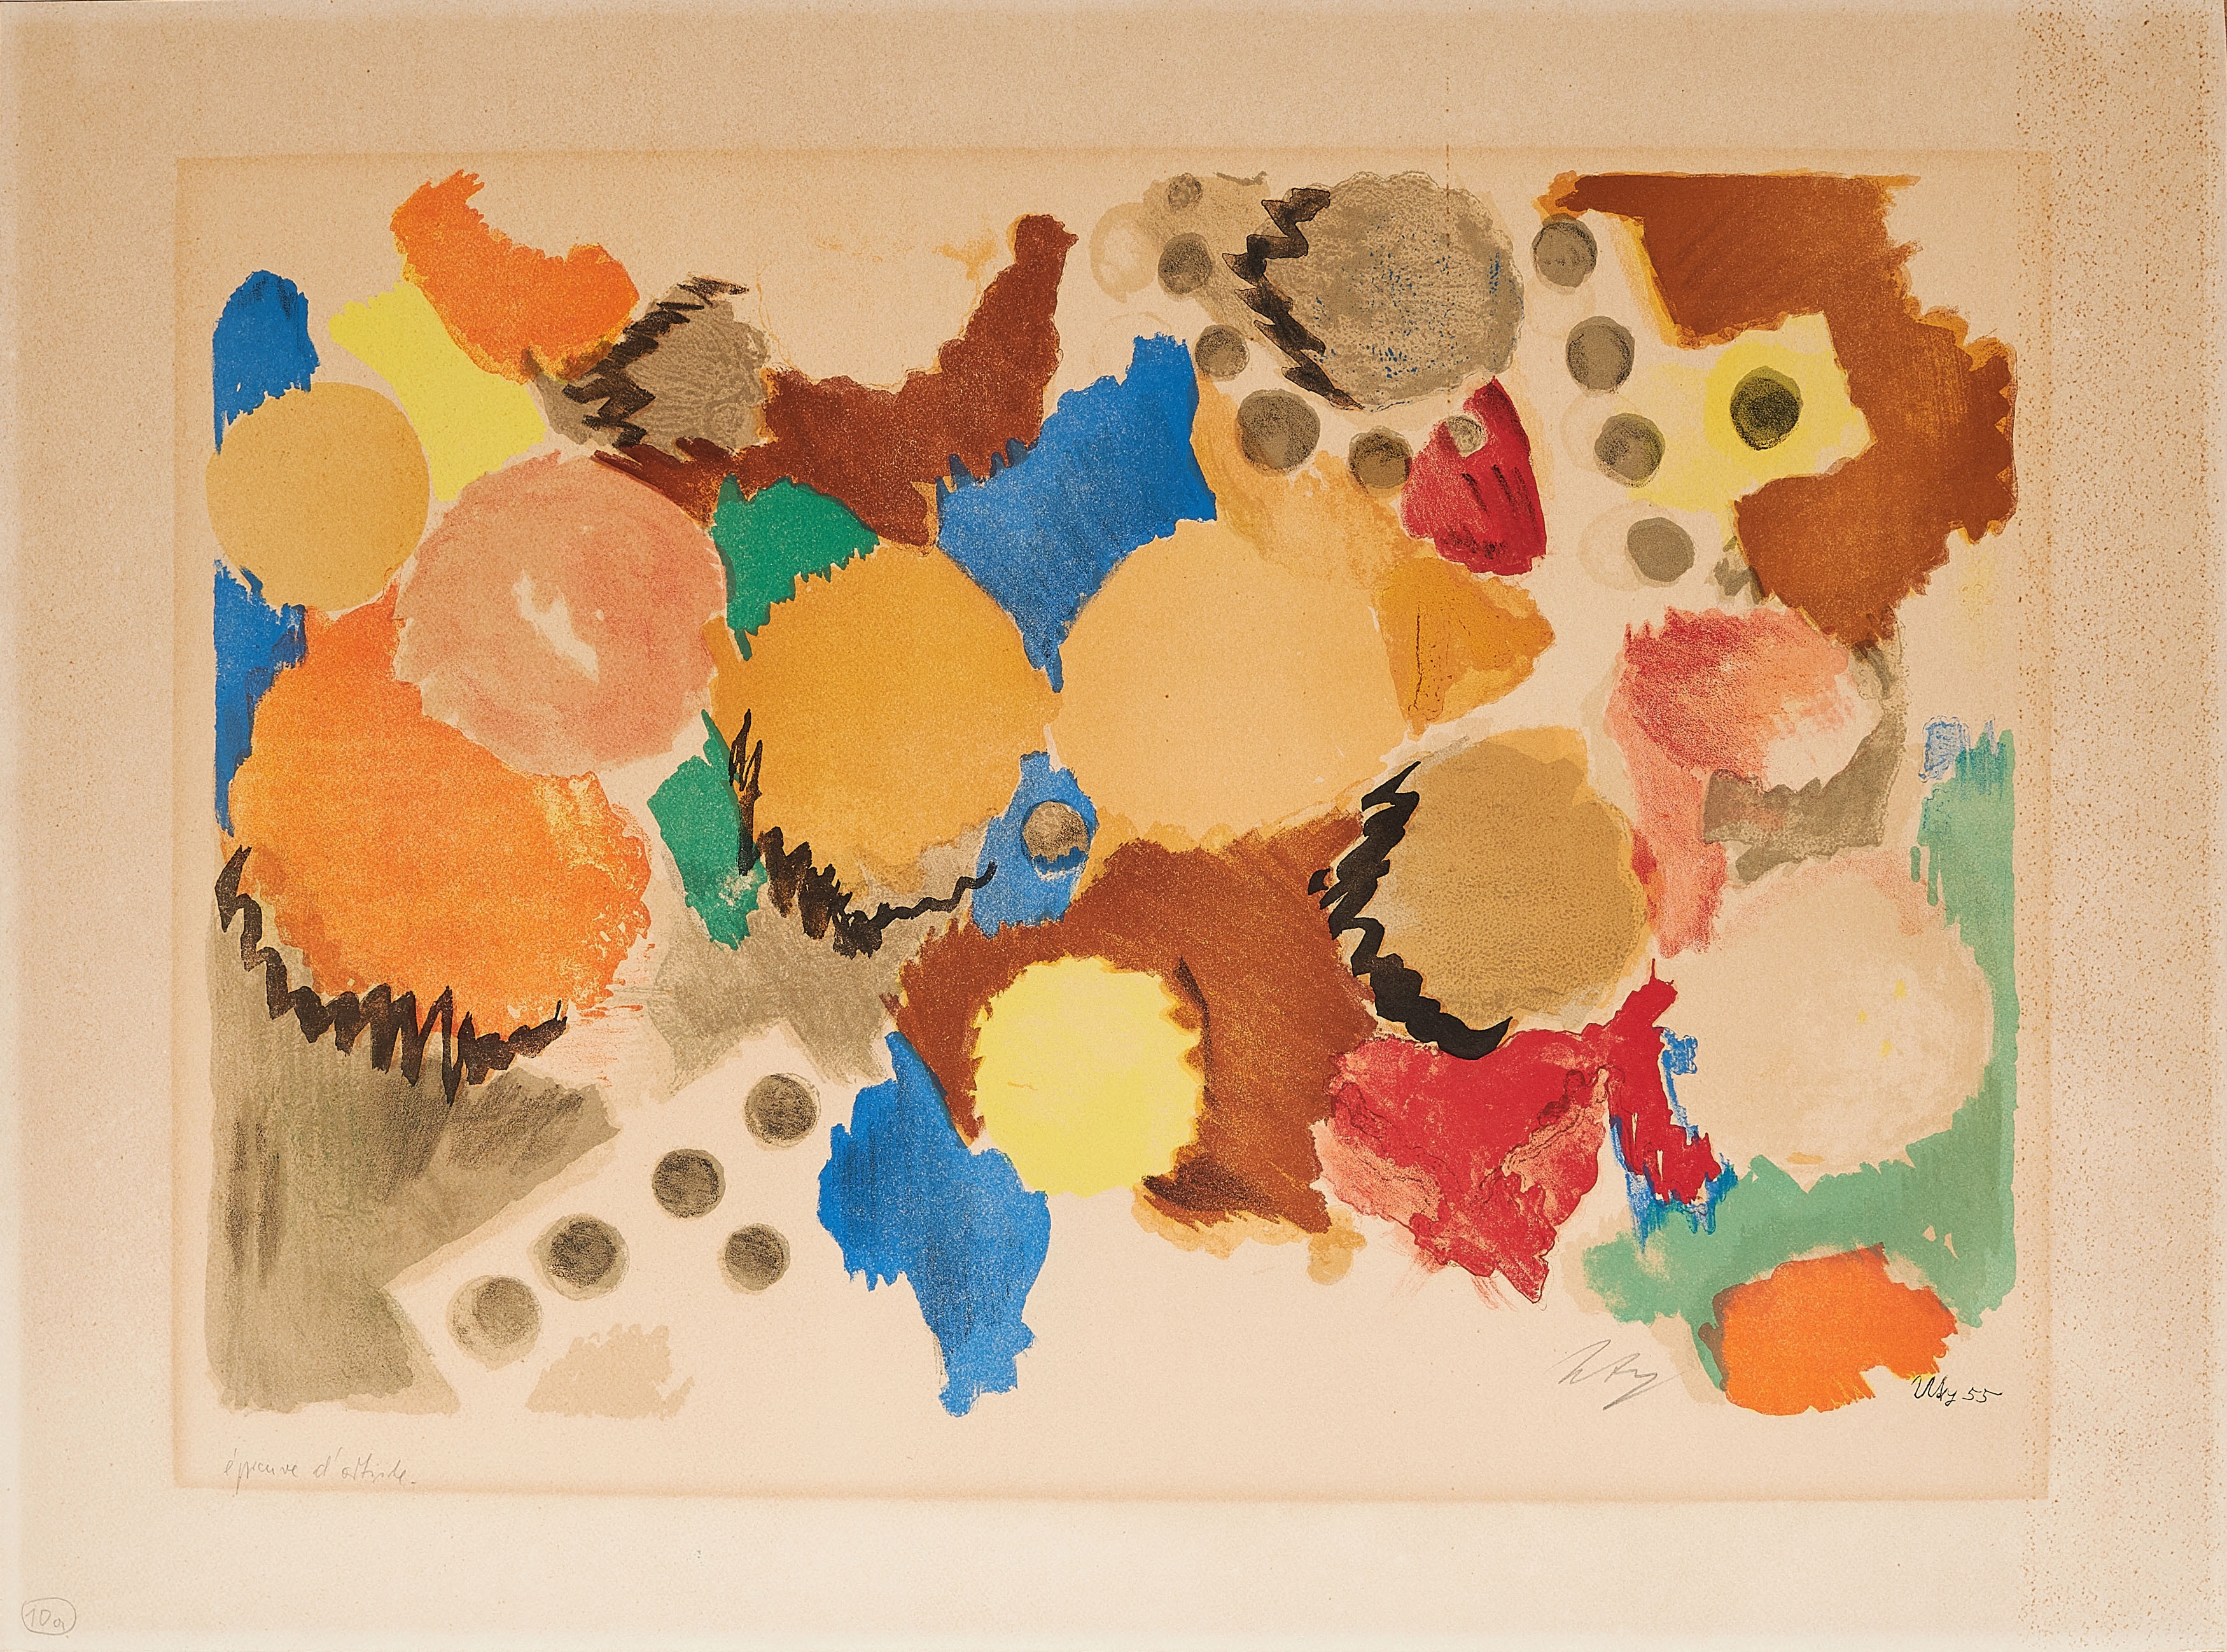 Farblitho 1955 (NOR). by Ernst Wilhelm Nay, 1955